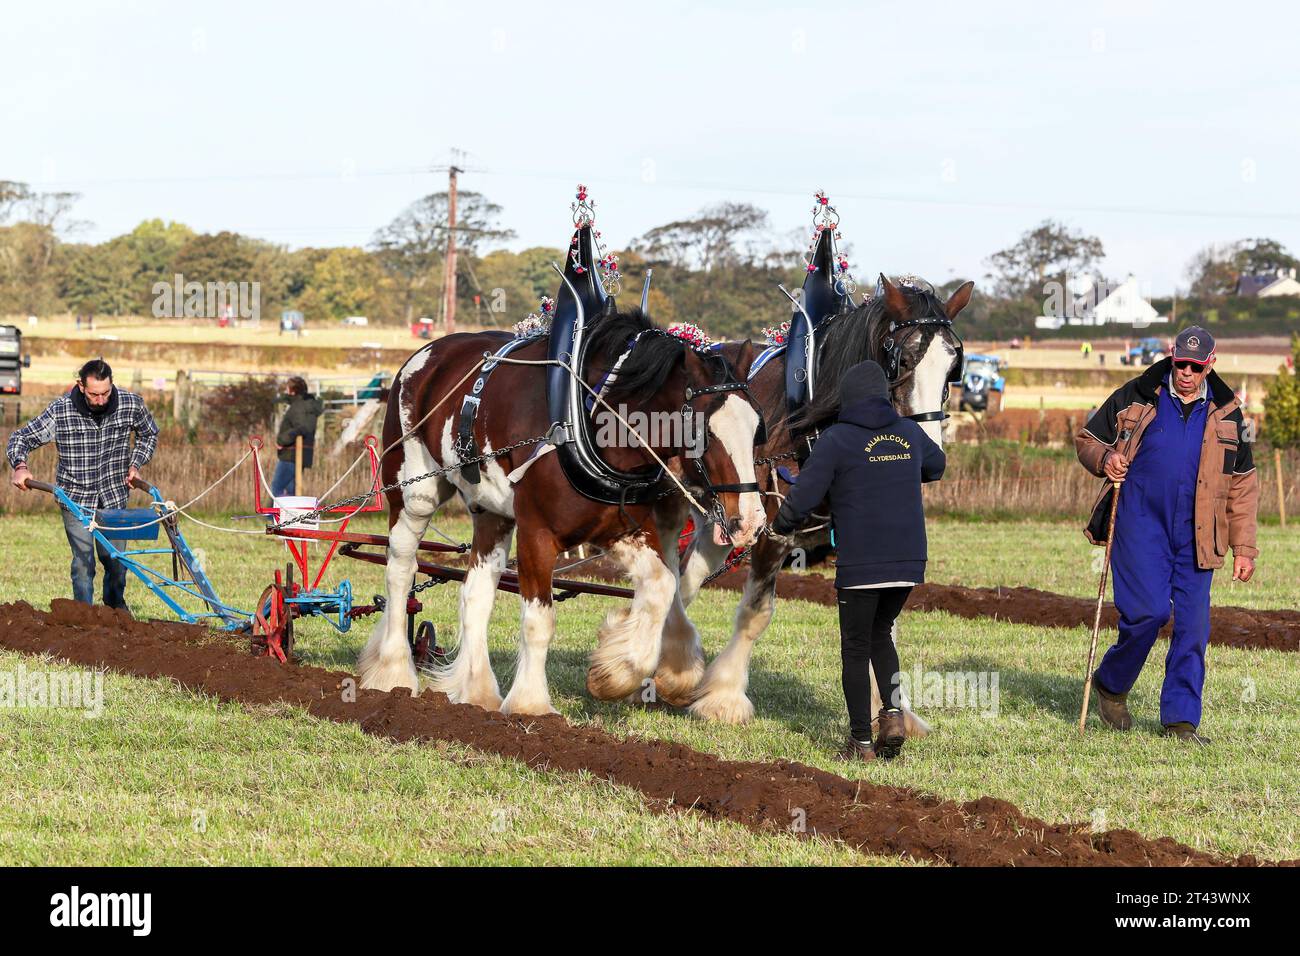 28 Oct 23, Prestwick, UK. The 59th Scottish Ploughing Championships, held over more than 200 acres of Montonhill Farm, near Prestwick, Ayrshire, Scotland, UK, attracted more than 100 International entrants, to classes including Shire and Clydesdale horses, European classic and vintage tractors and ploughs, as well as modern tractors with ploughs. The winners will get qualification points and may go on to take part in the world ploughing championships. Credit: Findlay/Alamy Live News Stock Photo